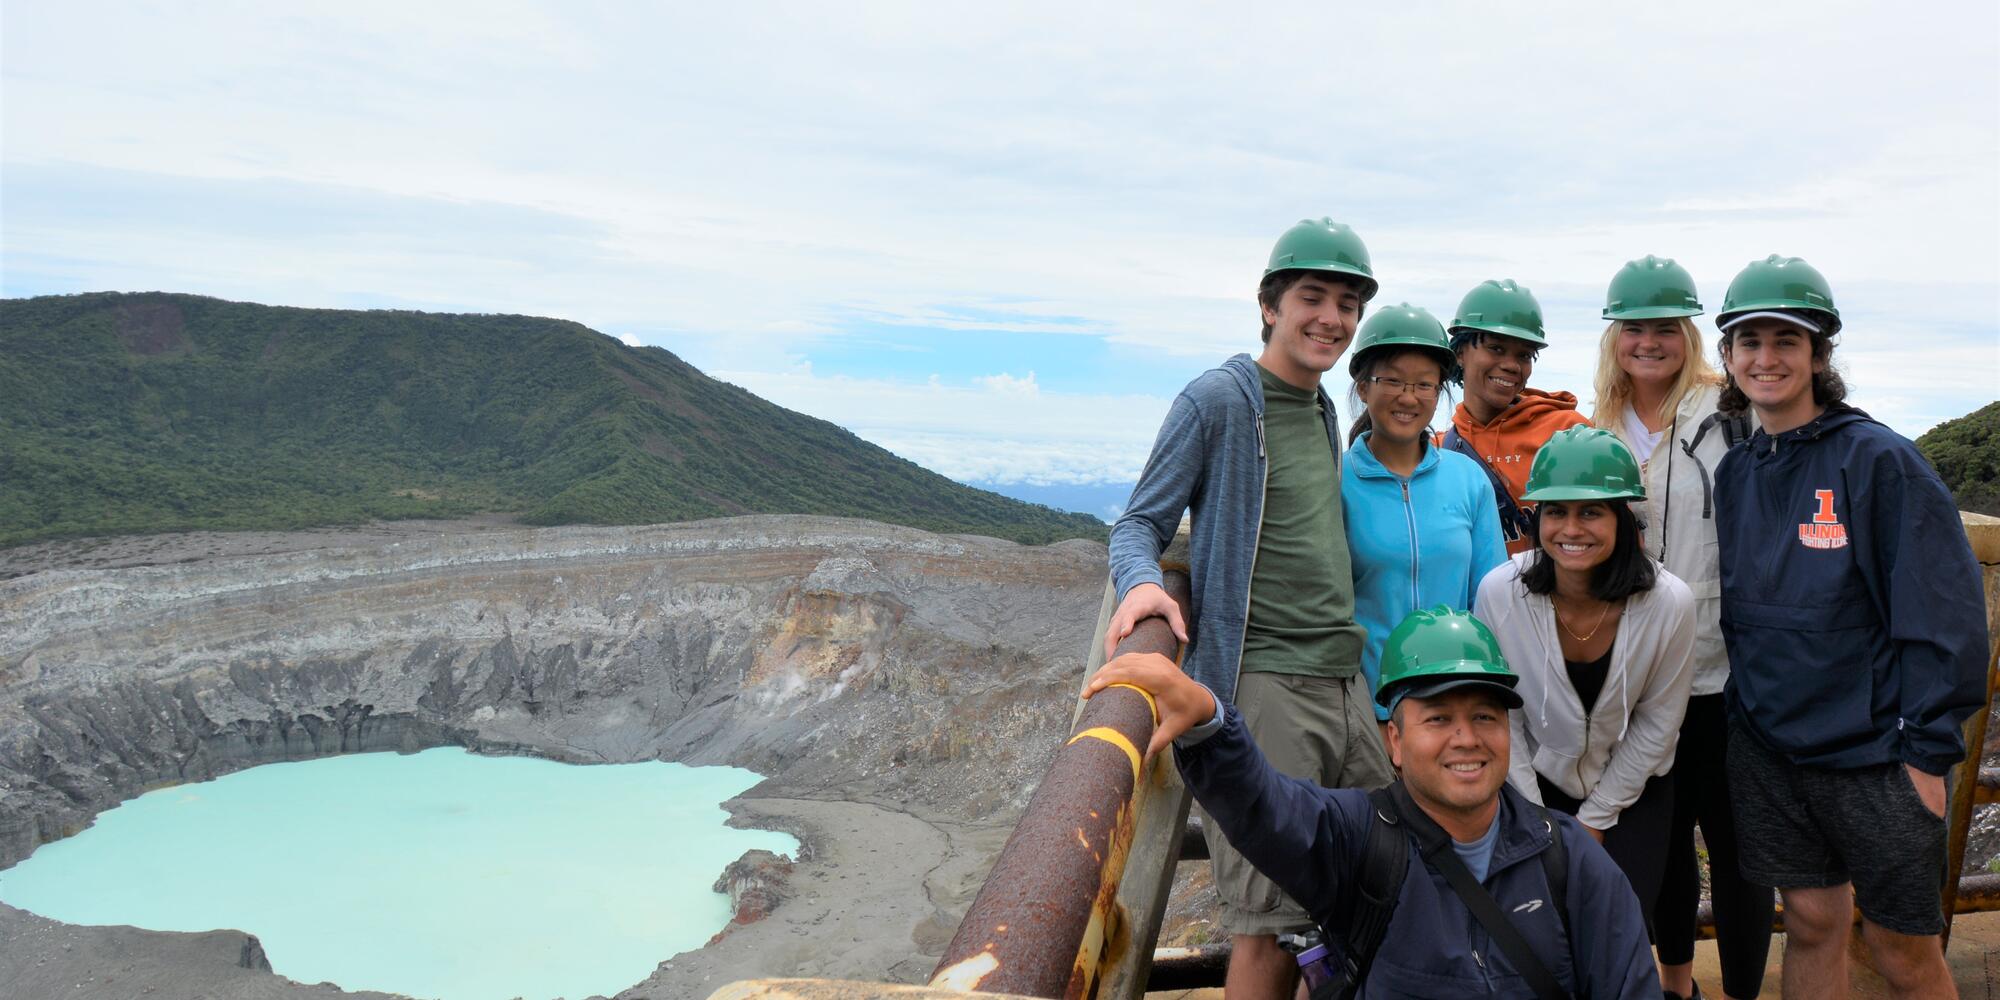 Group of students wearing hard hats stand on ledge overlooking a water body in Costa Rica with wear